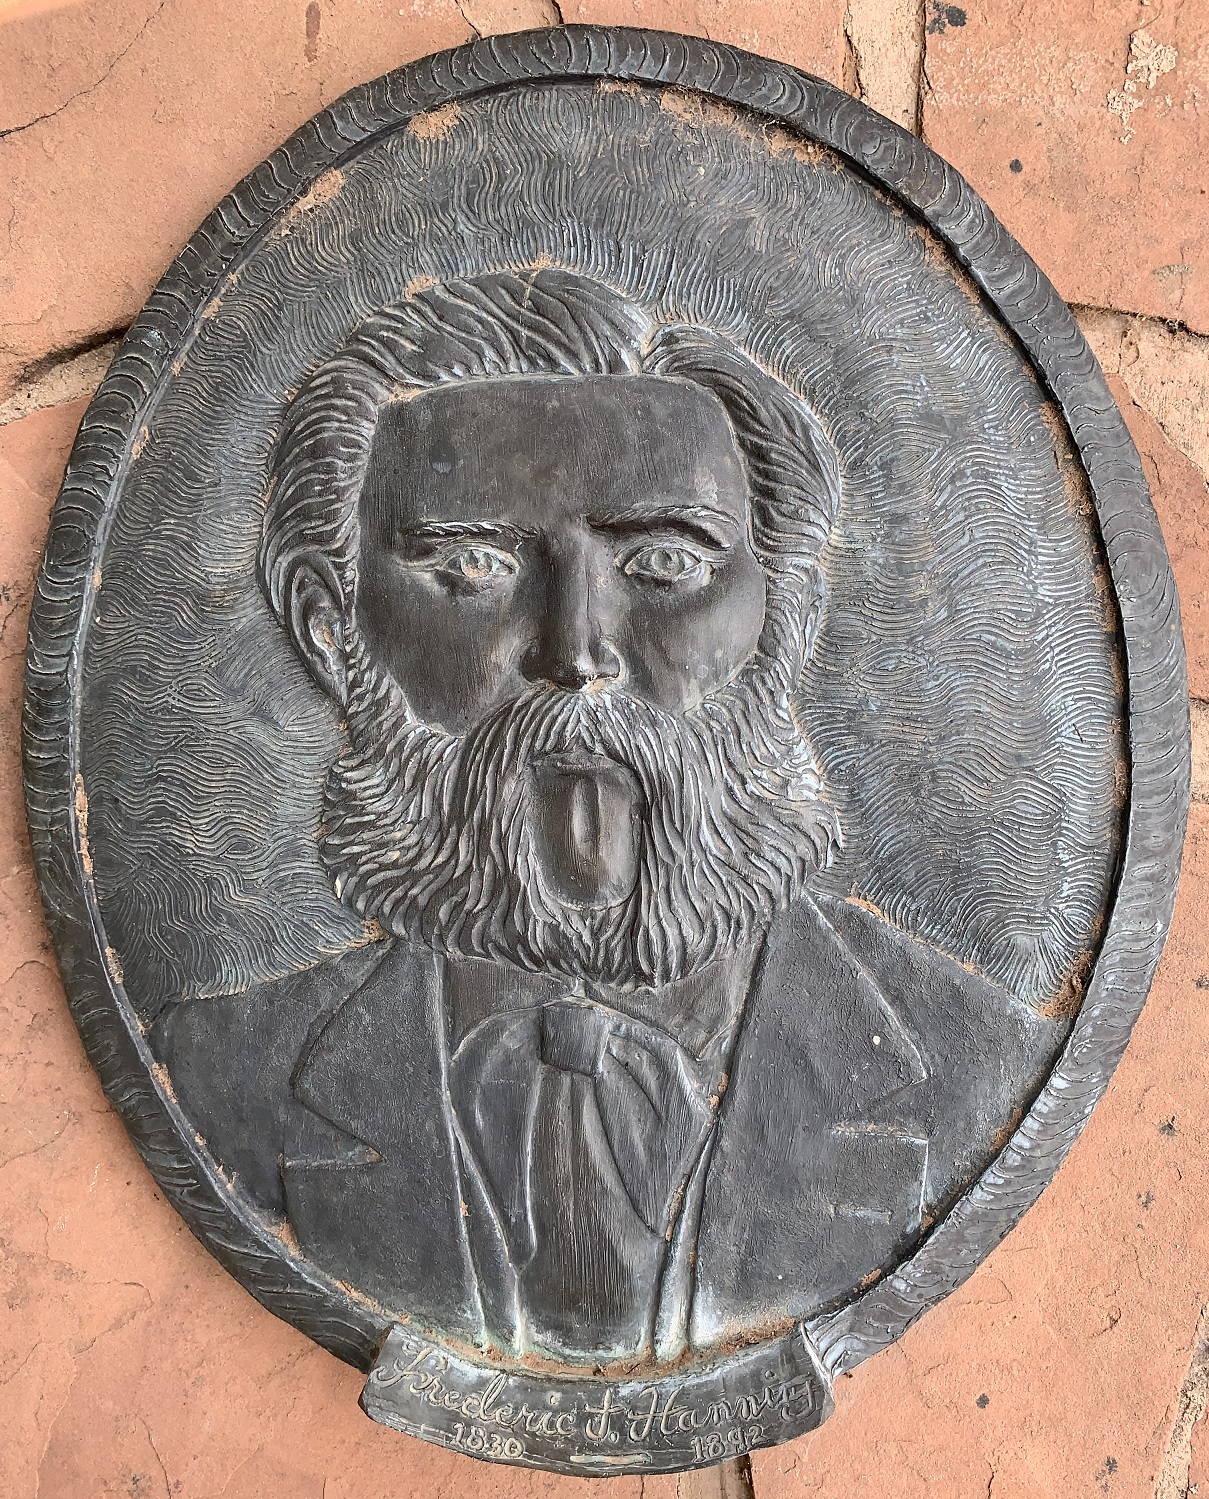 Face plaque of Frederic J. Hannig at the Monument Plaza in Washington, Utah